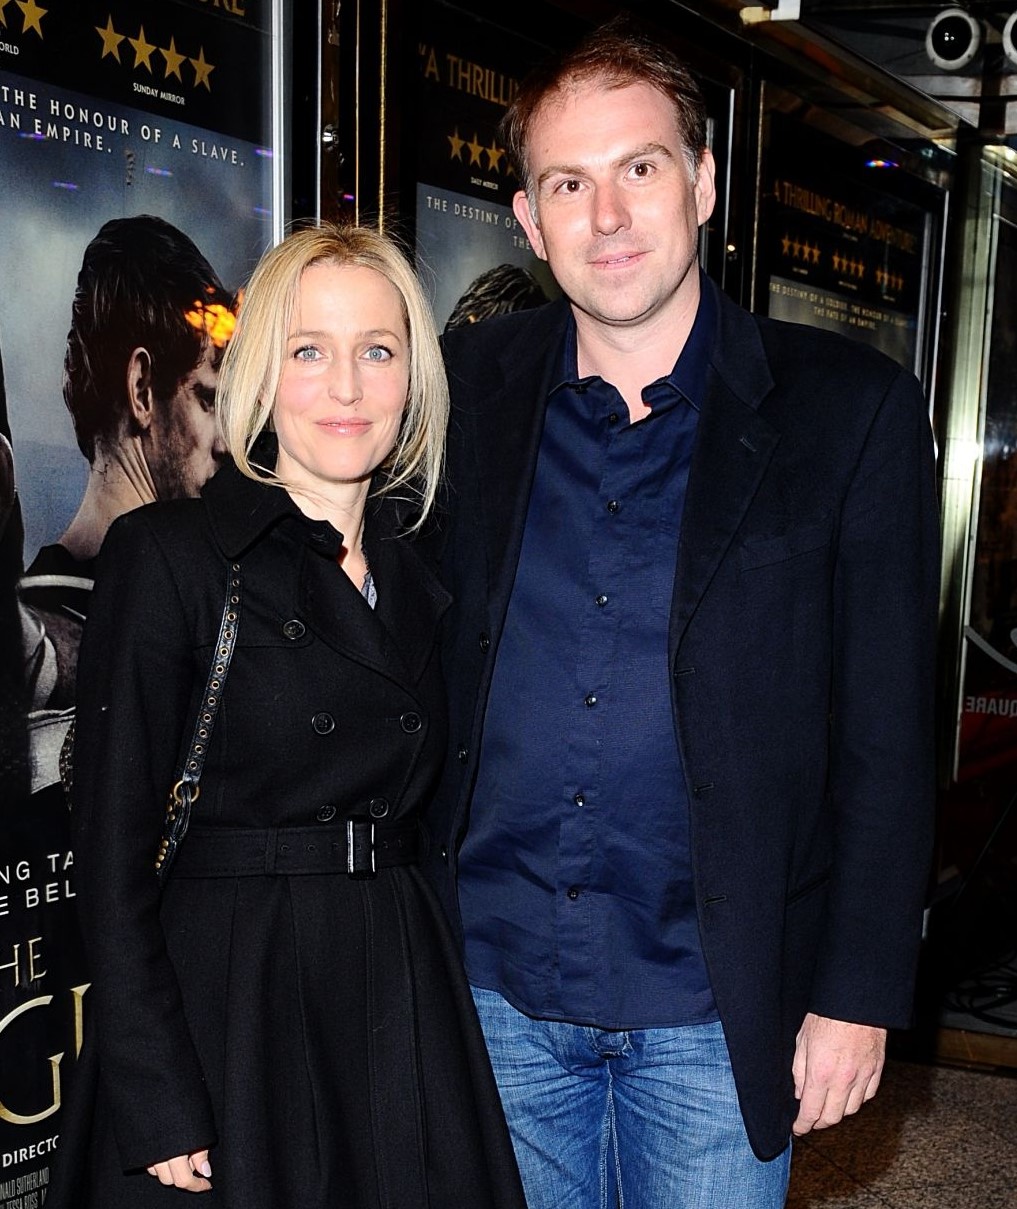 Clyde Klotz with his beautiful ex-wife Gillian Anderson, attending an event show.